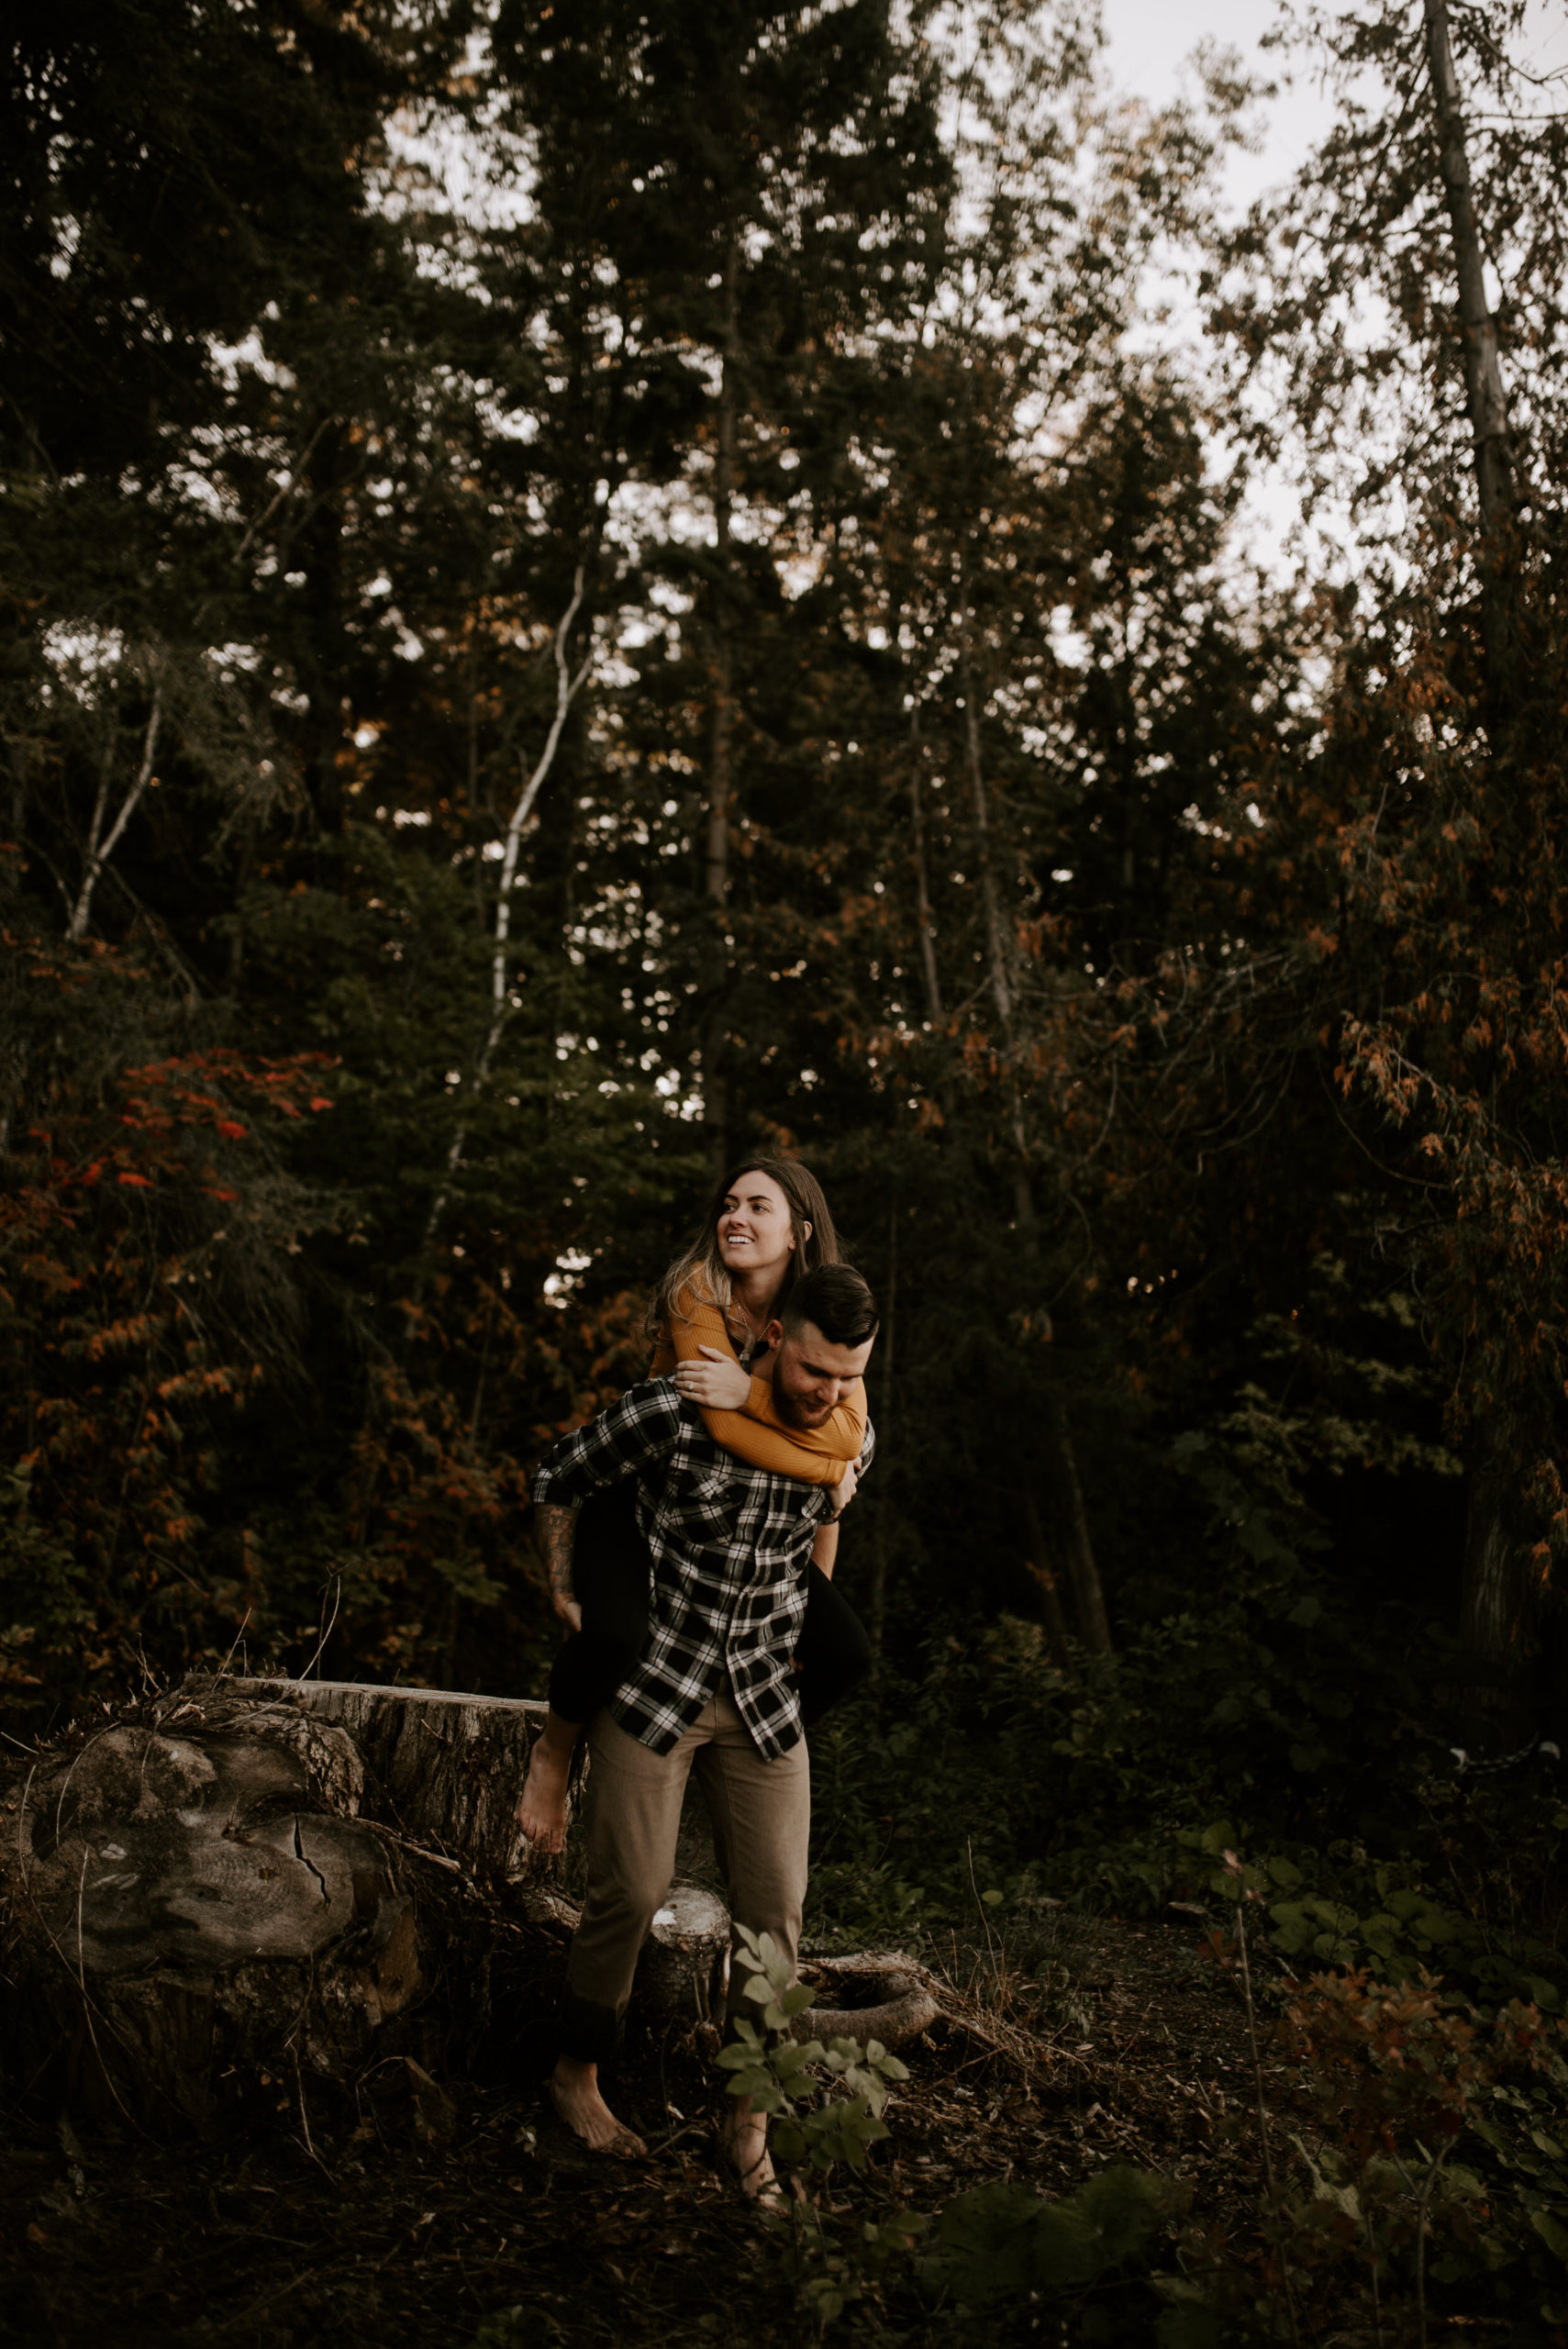 Muskoka Engagement Session - carrying her on his back